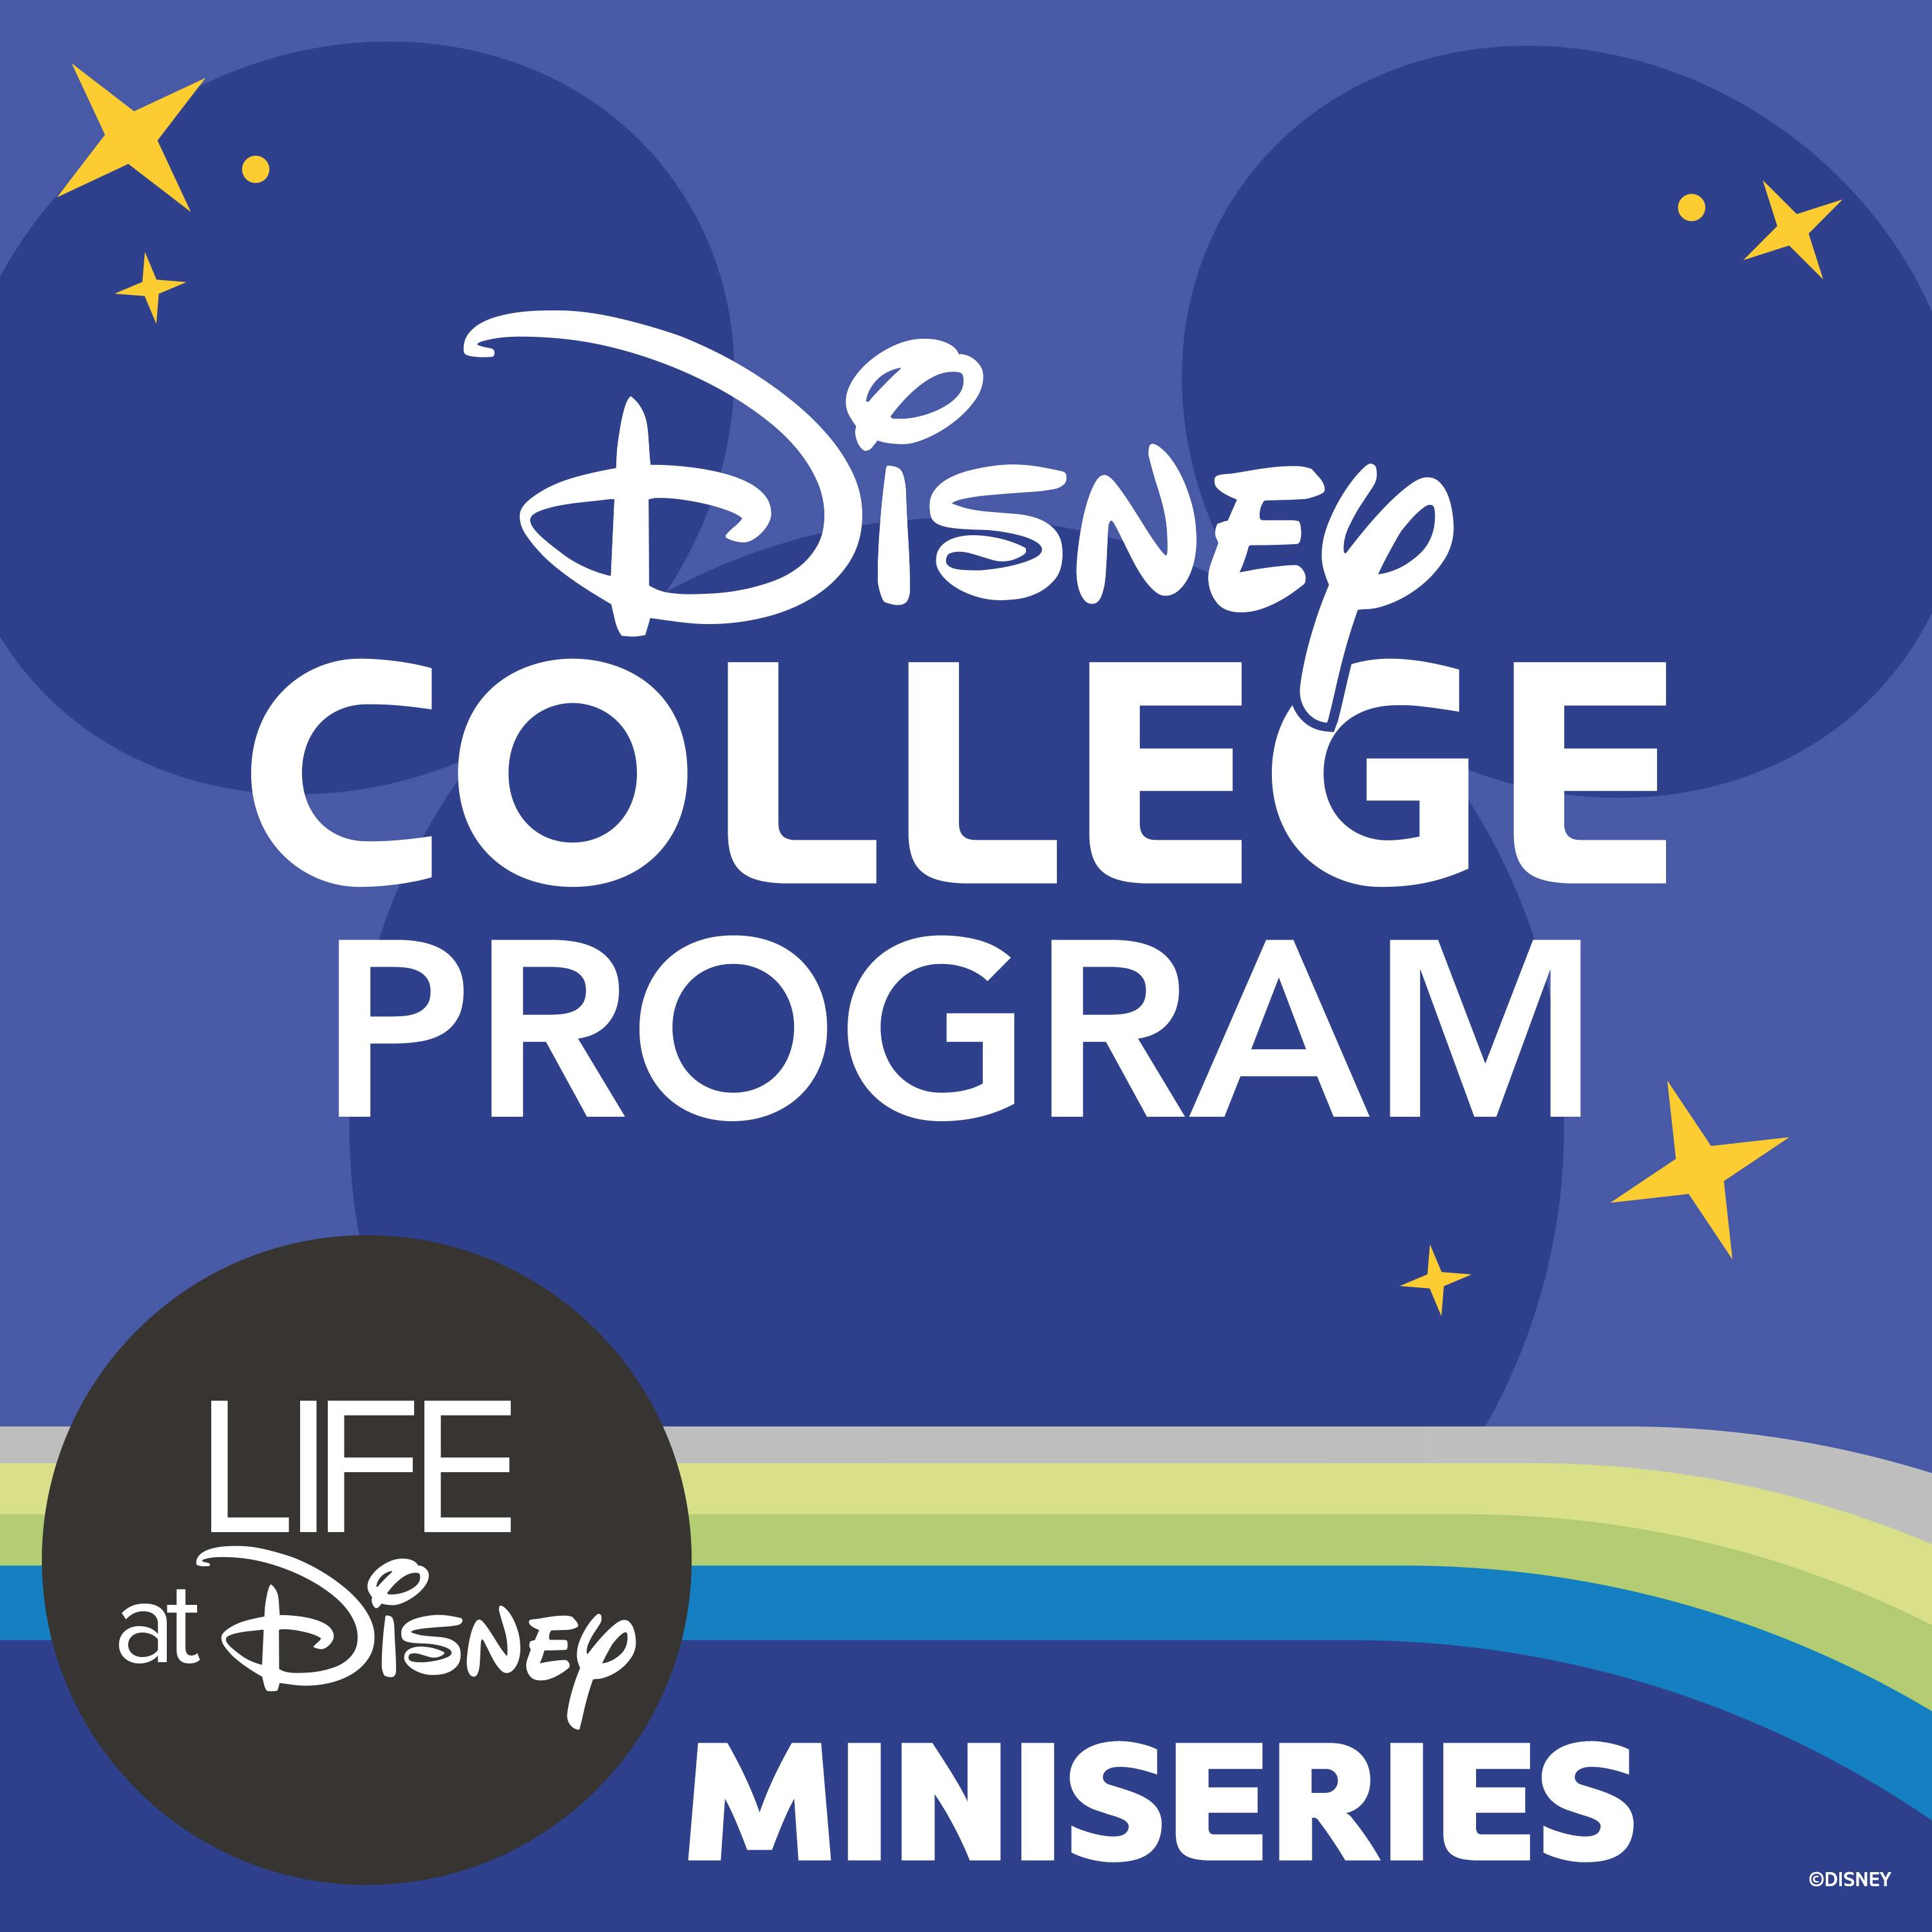 DCP MINISERIES 1 - Do As Dreamers Do on a Disney College Program